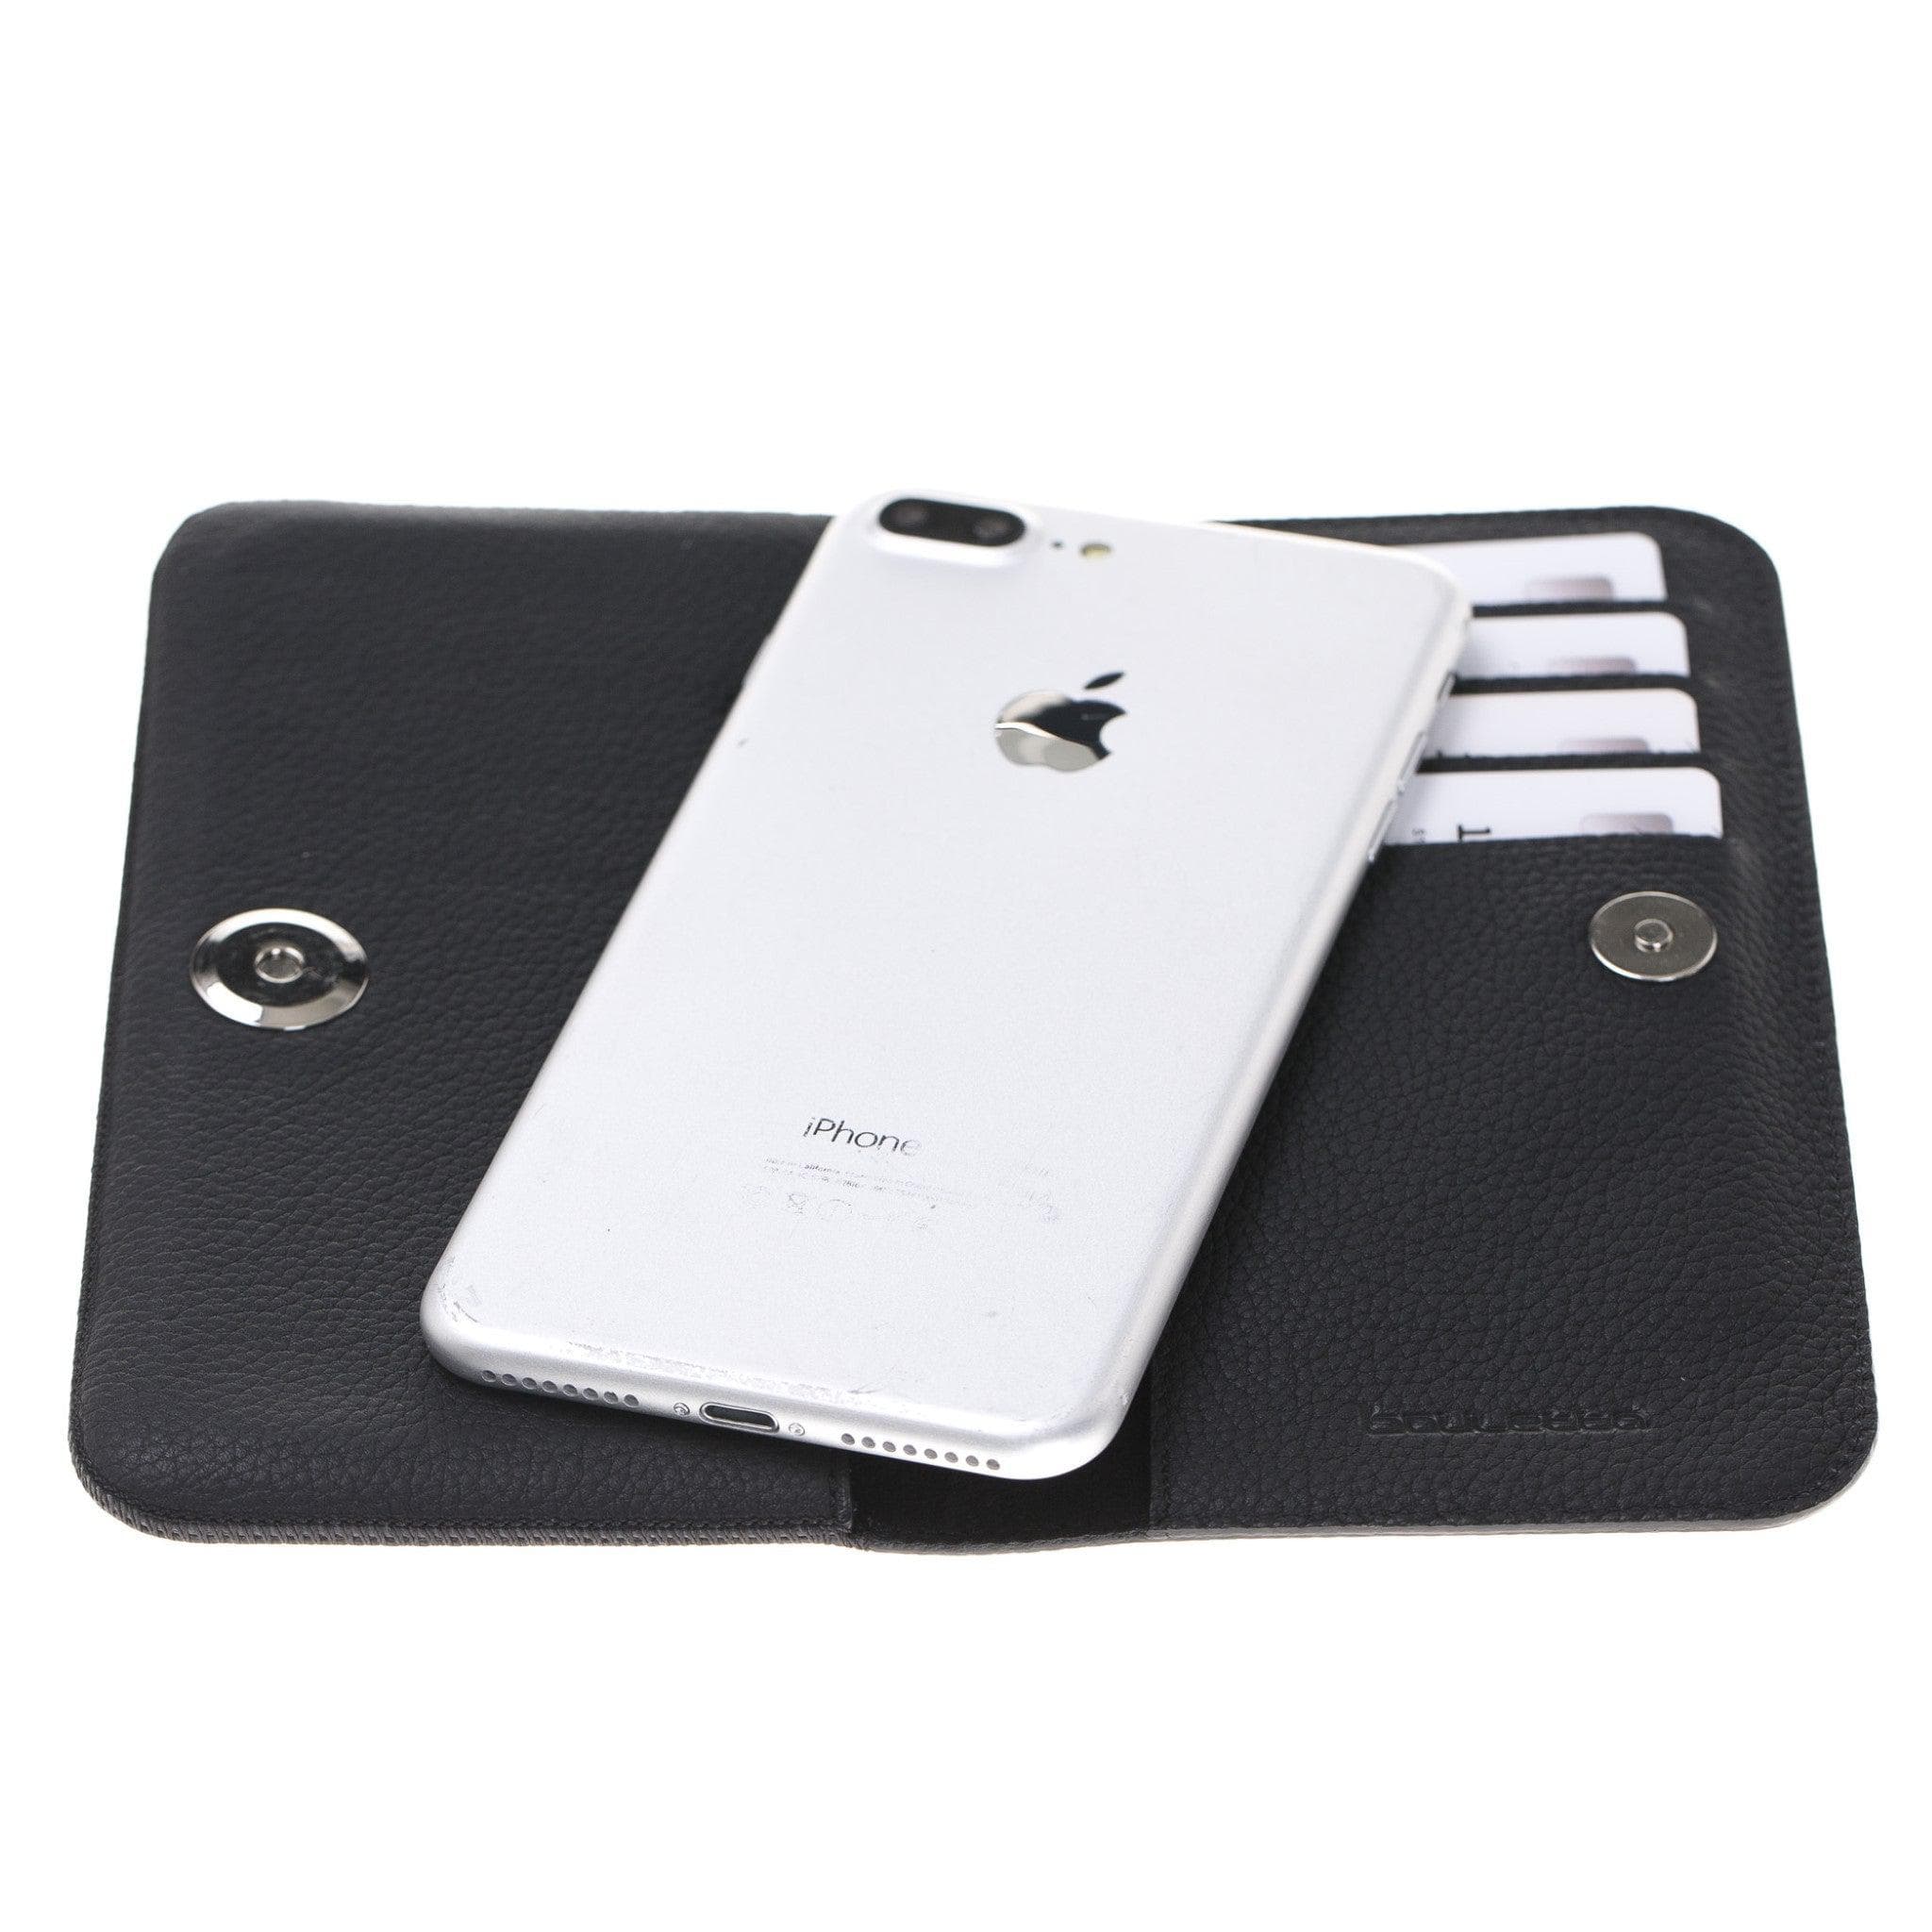 Universal Grip Genuine Leather Wallet Compatible with Phones up to 5.7" Bouletta LTD